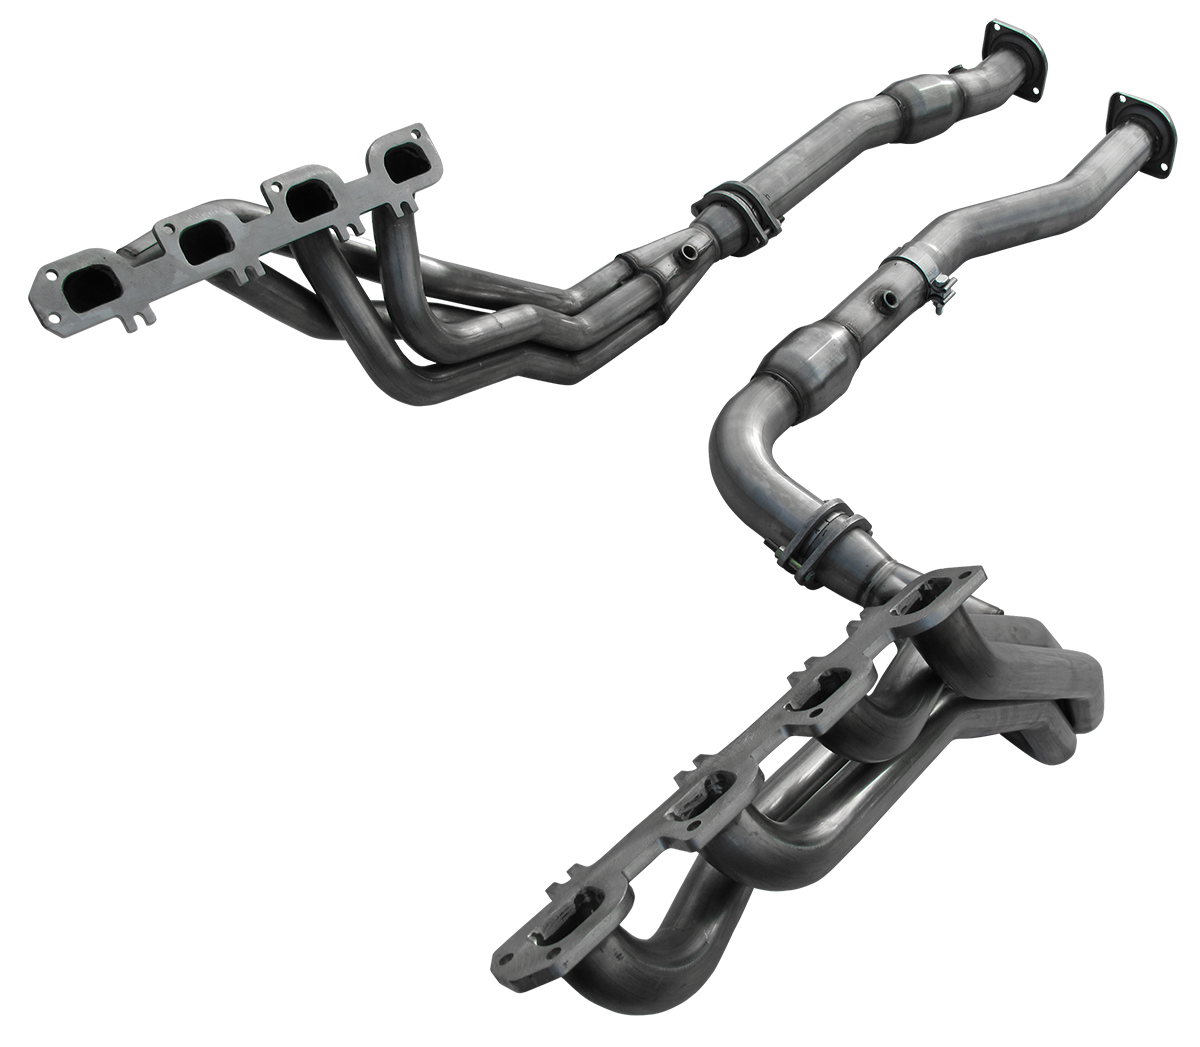 2006-2010 Jeep SRT8 6.1L V8 American Racing Headers 1 7/8" x 3" Long Tube Headers w/3" Offroad Connection Pipes